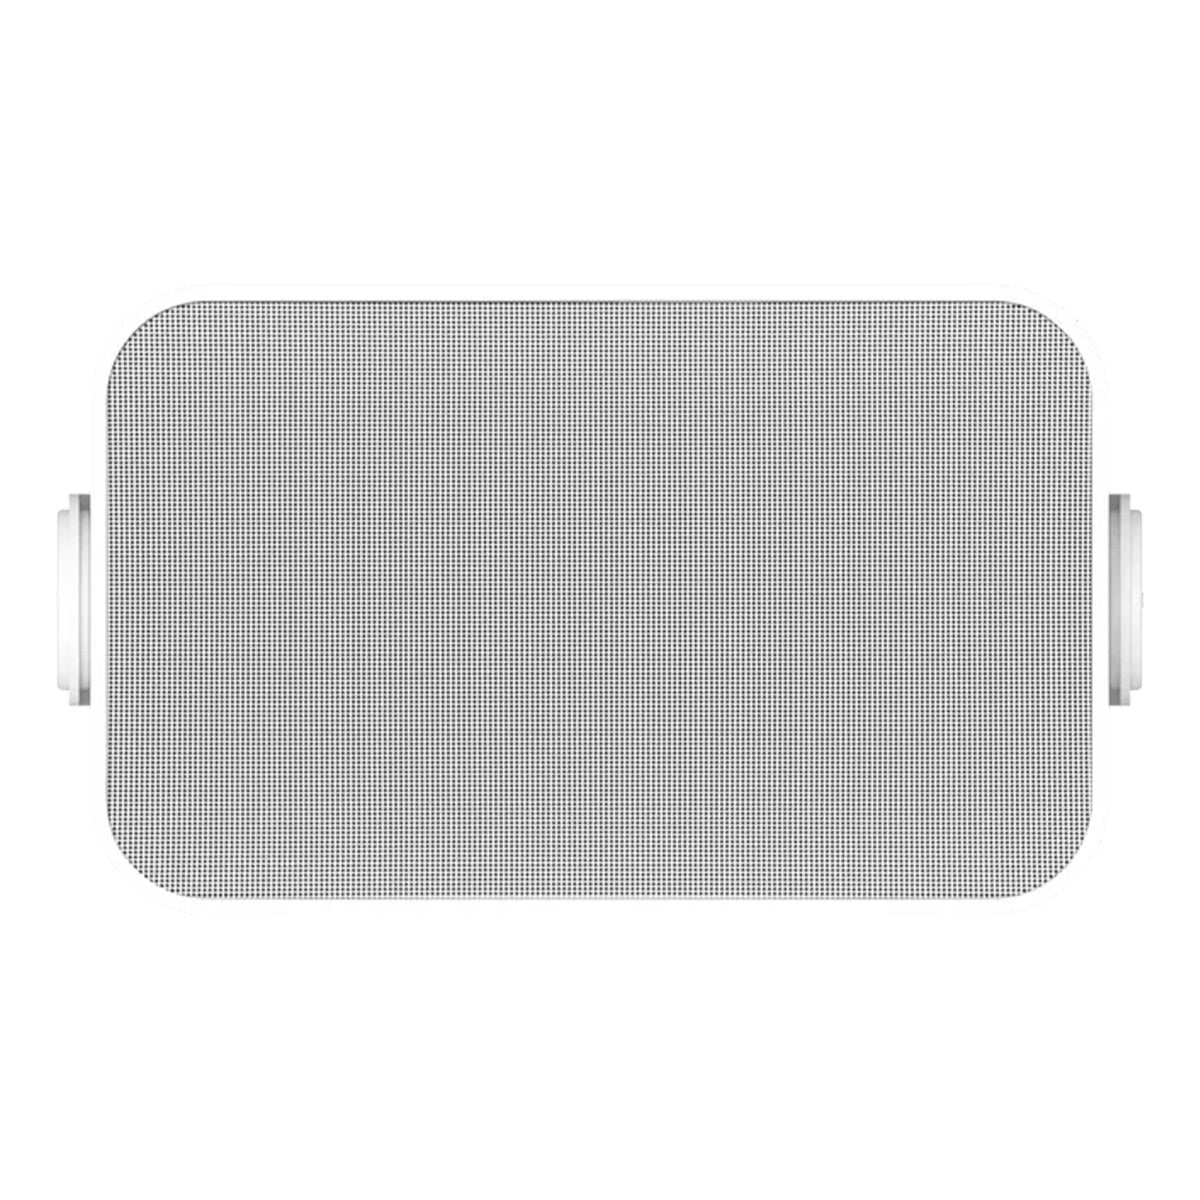 Sonos OUTDRWW1 Outdoor Architectural Speakers - Pair (White)